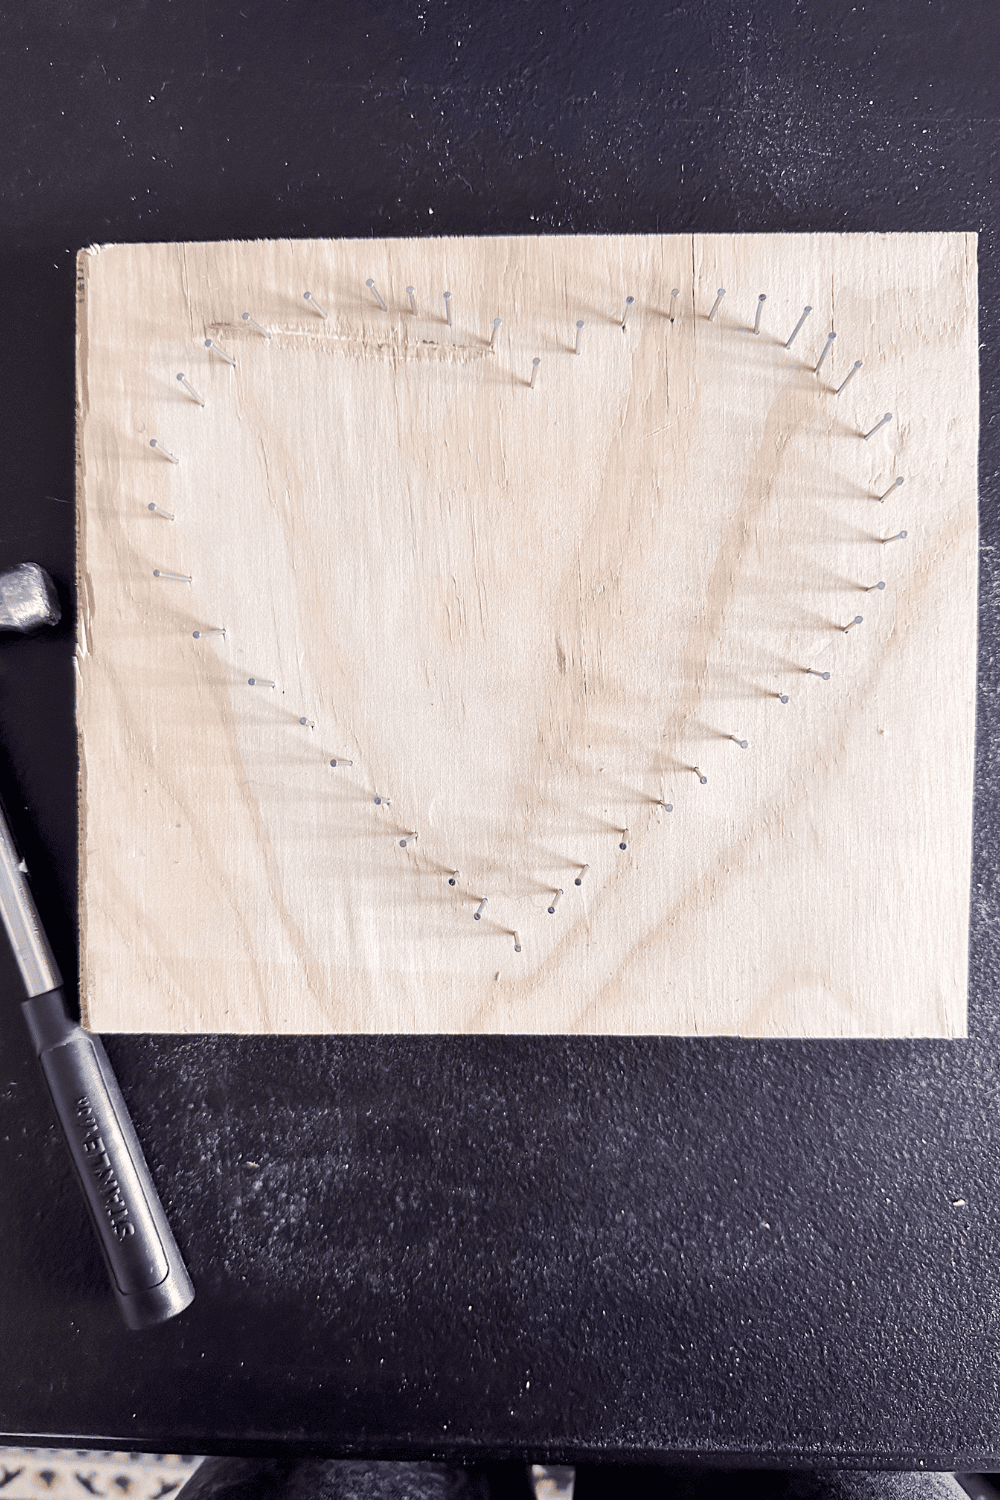 Nails on a piece of wood in the shape of a heart